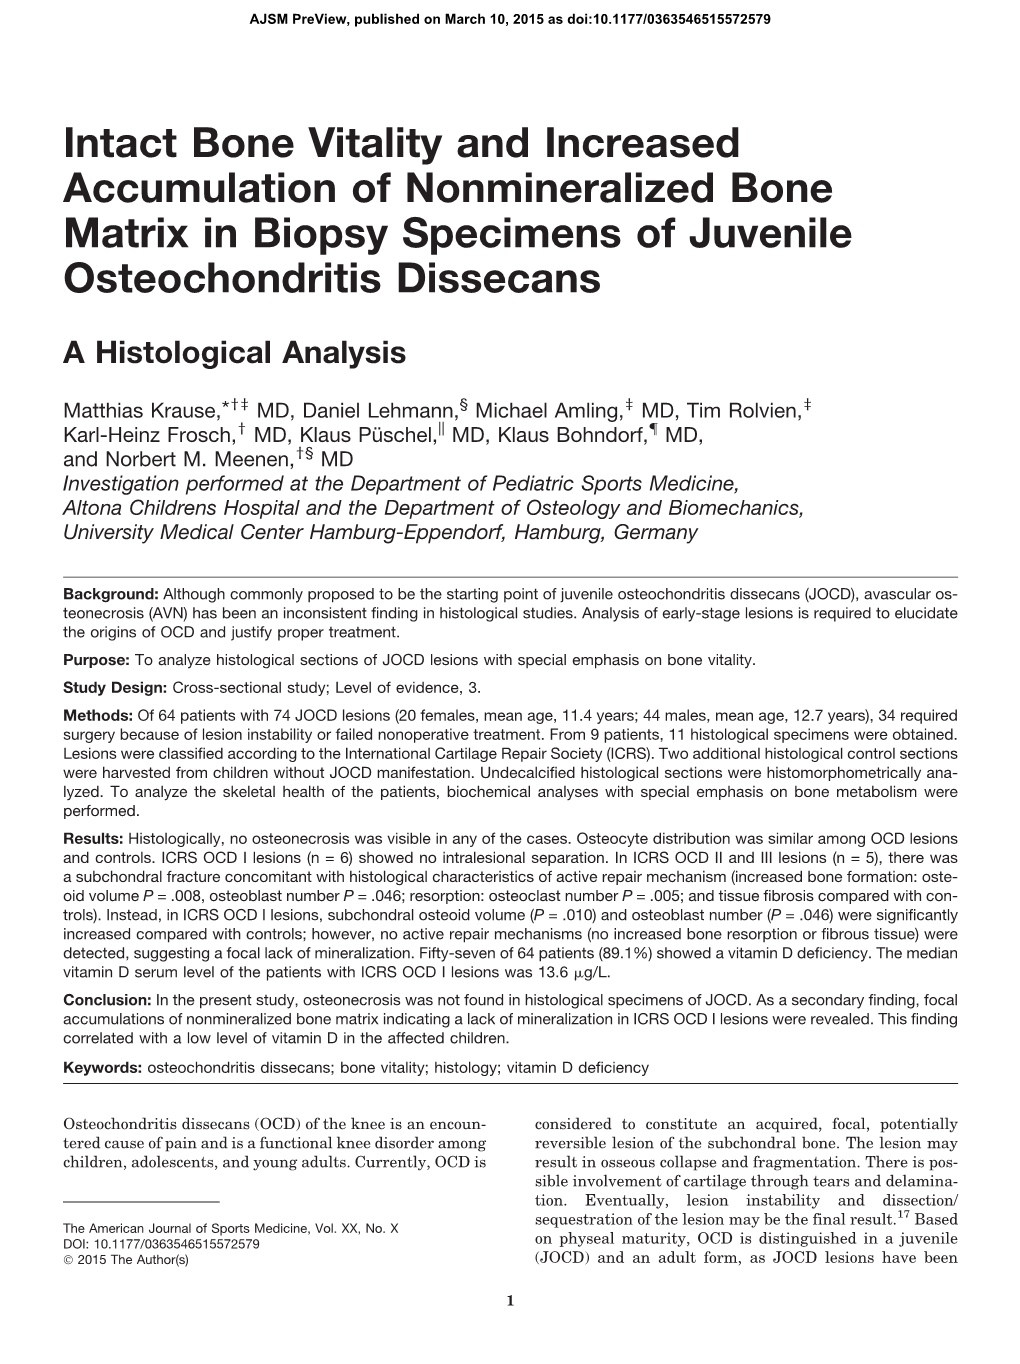 Intact Bone Vitality and Increased Accumulation of Nonmineralized Bone Matrix in Biopsy Specimens of Juvenile Osteochondritis Dissecans